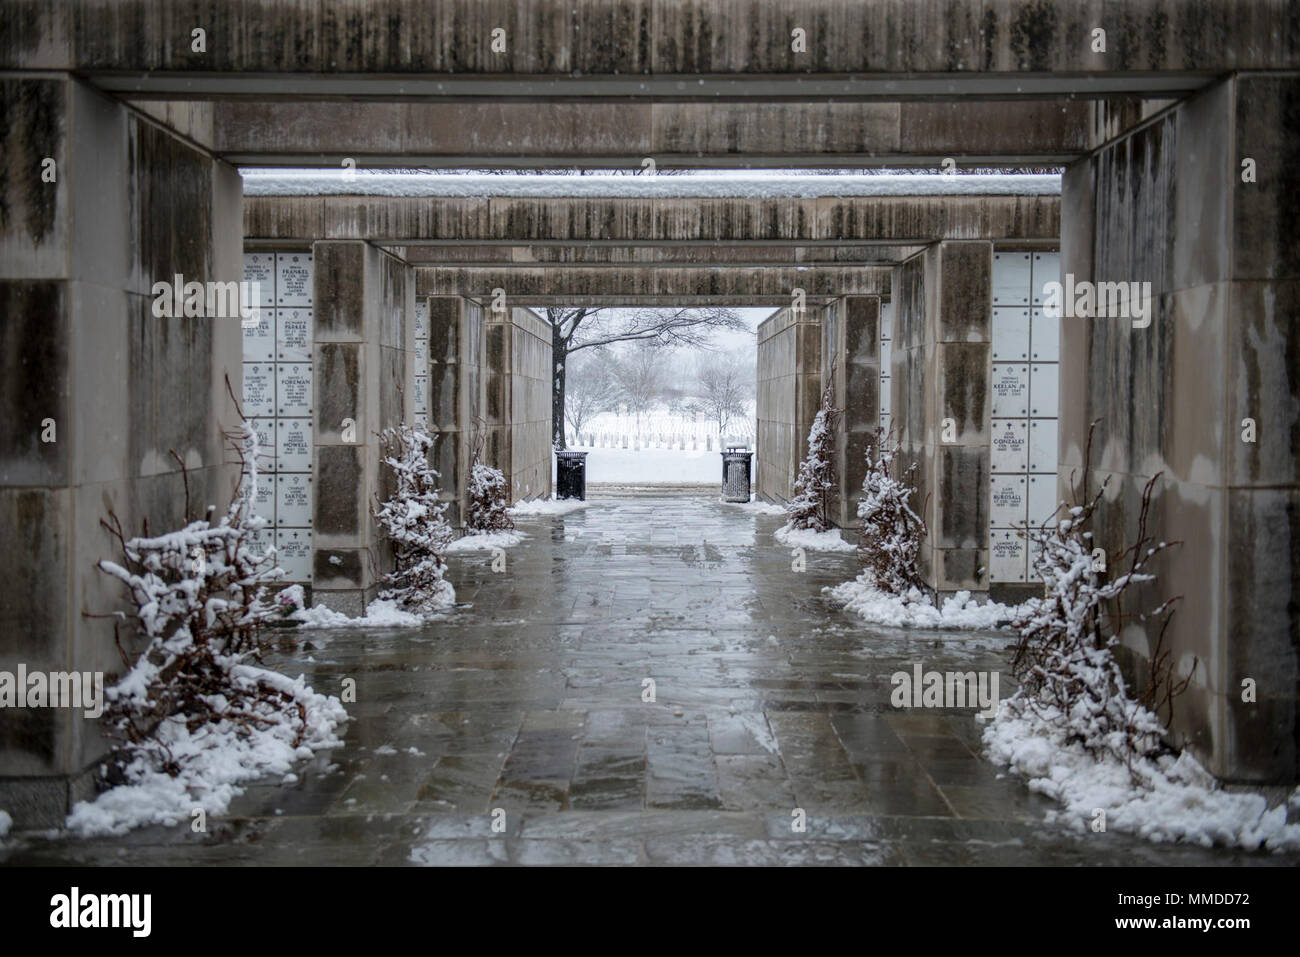 Snow falls in Columbarium Court 9 of Arlington National Cemetery, Arlington, Virginia, March 21, 2018. This was the second day of spring when a snow storm hit the national capital region. (U.S. Army Stock Photo